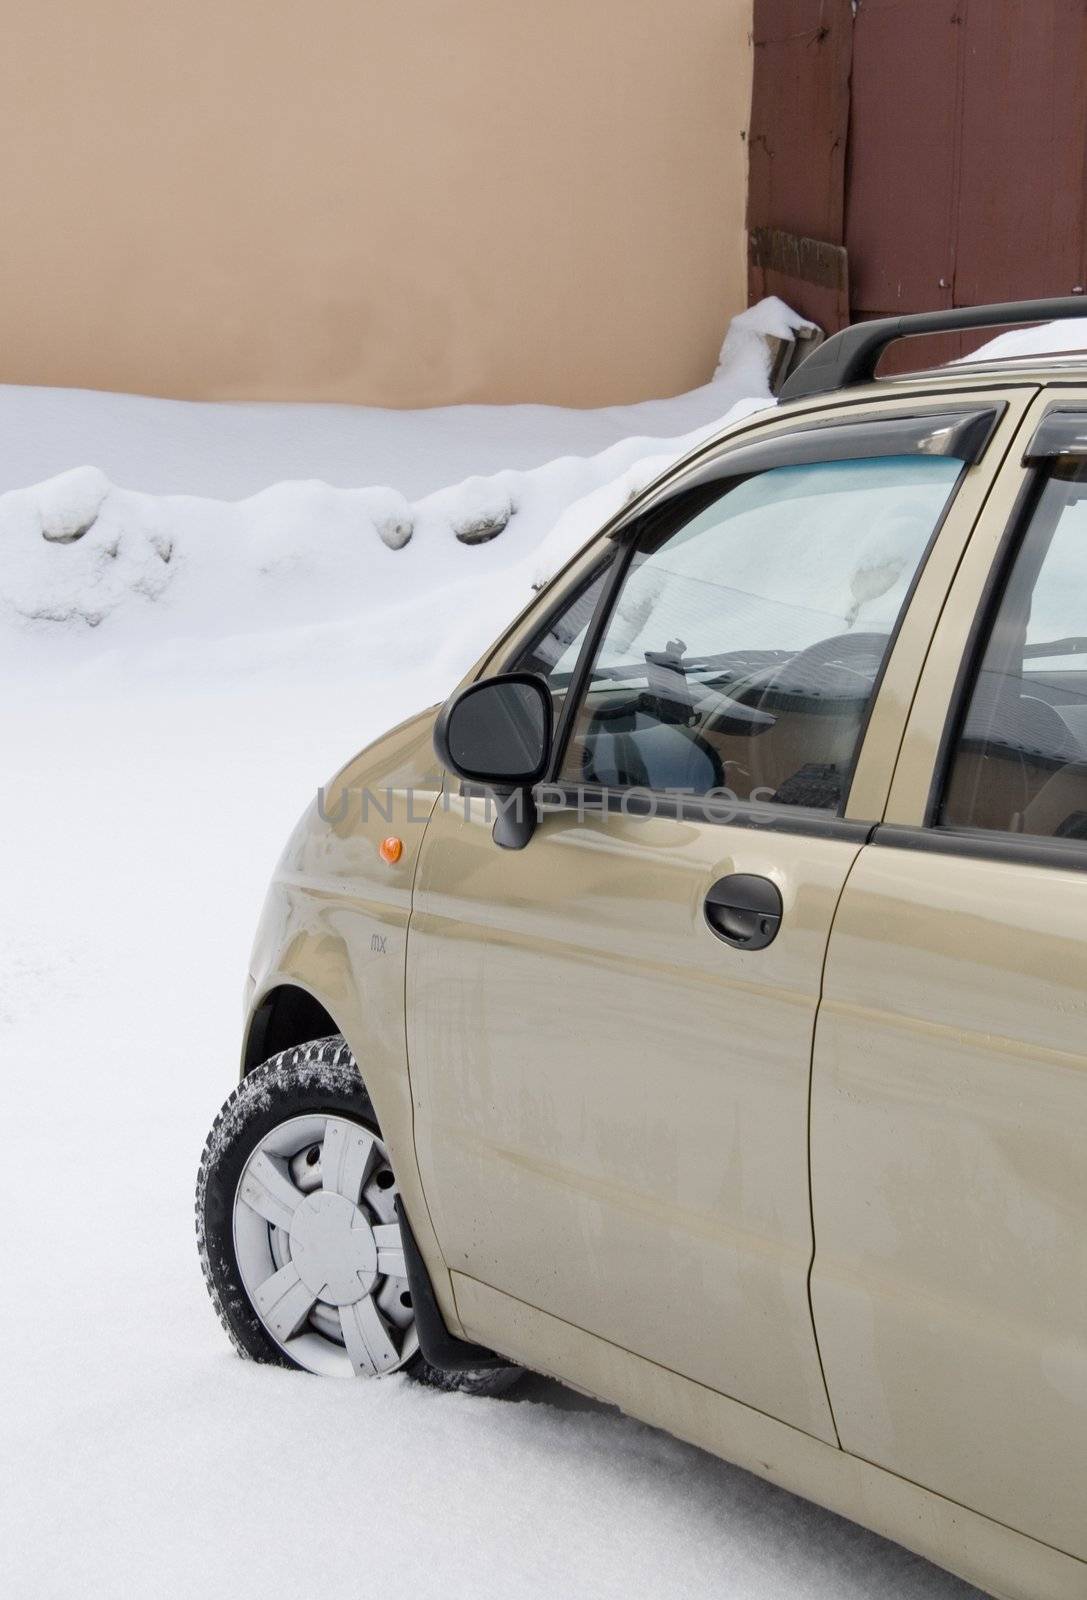 new car on white snow parked near a house